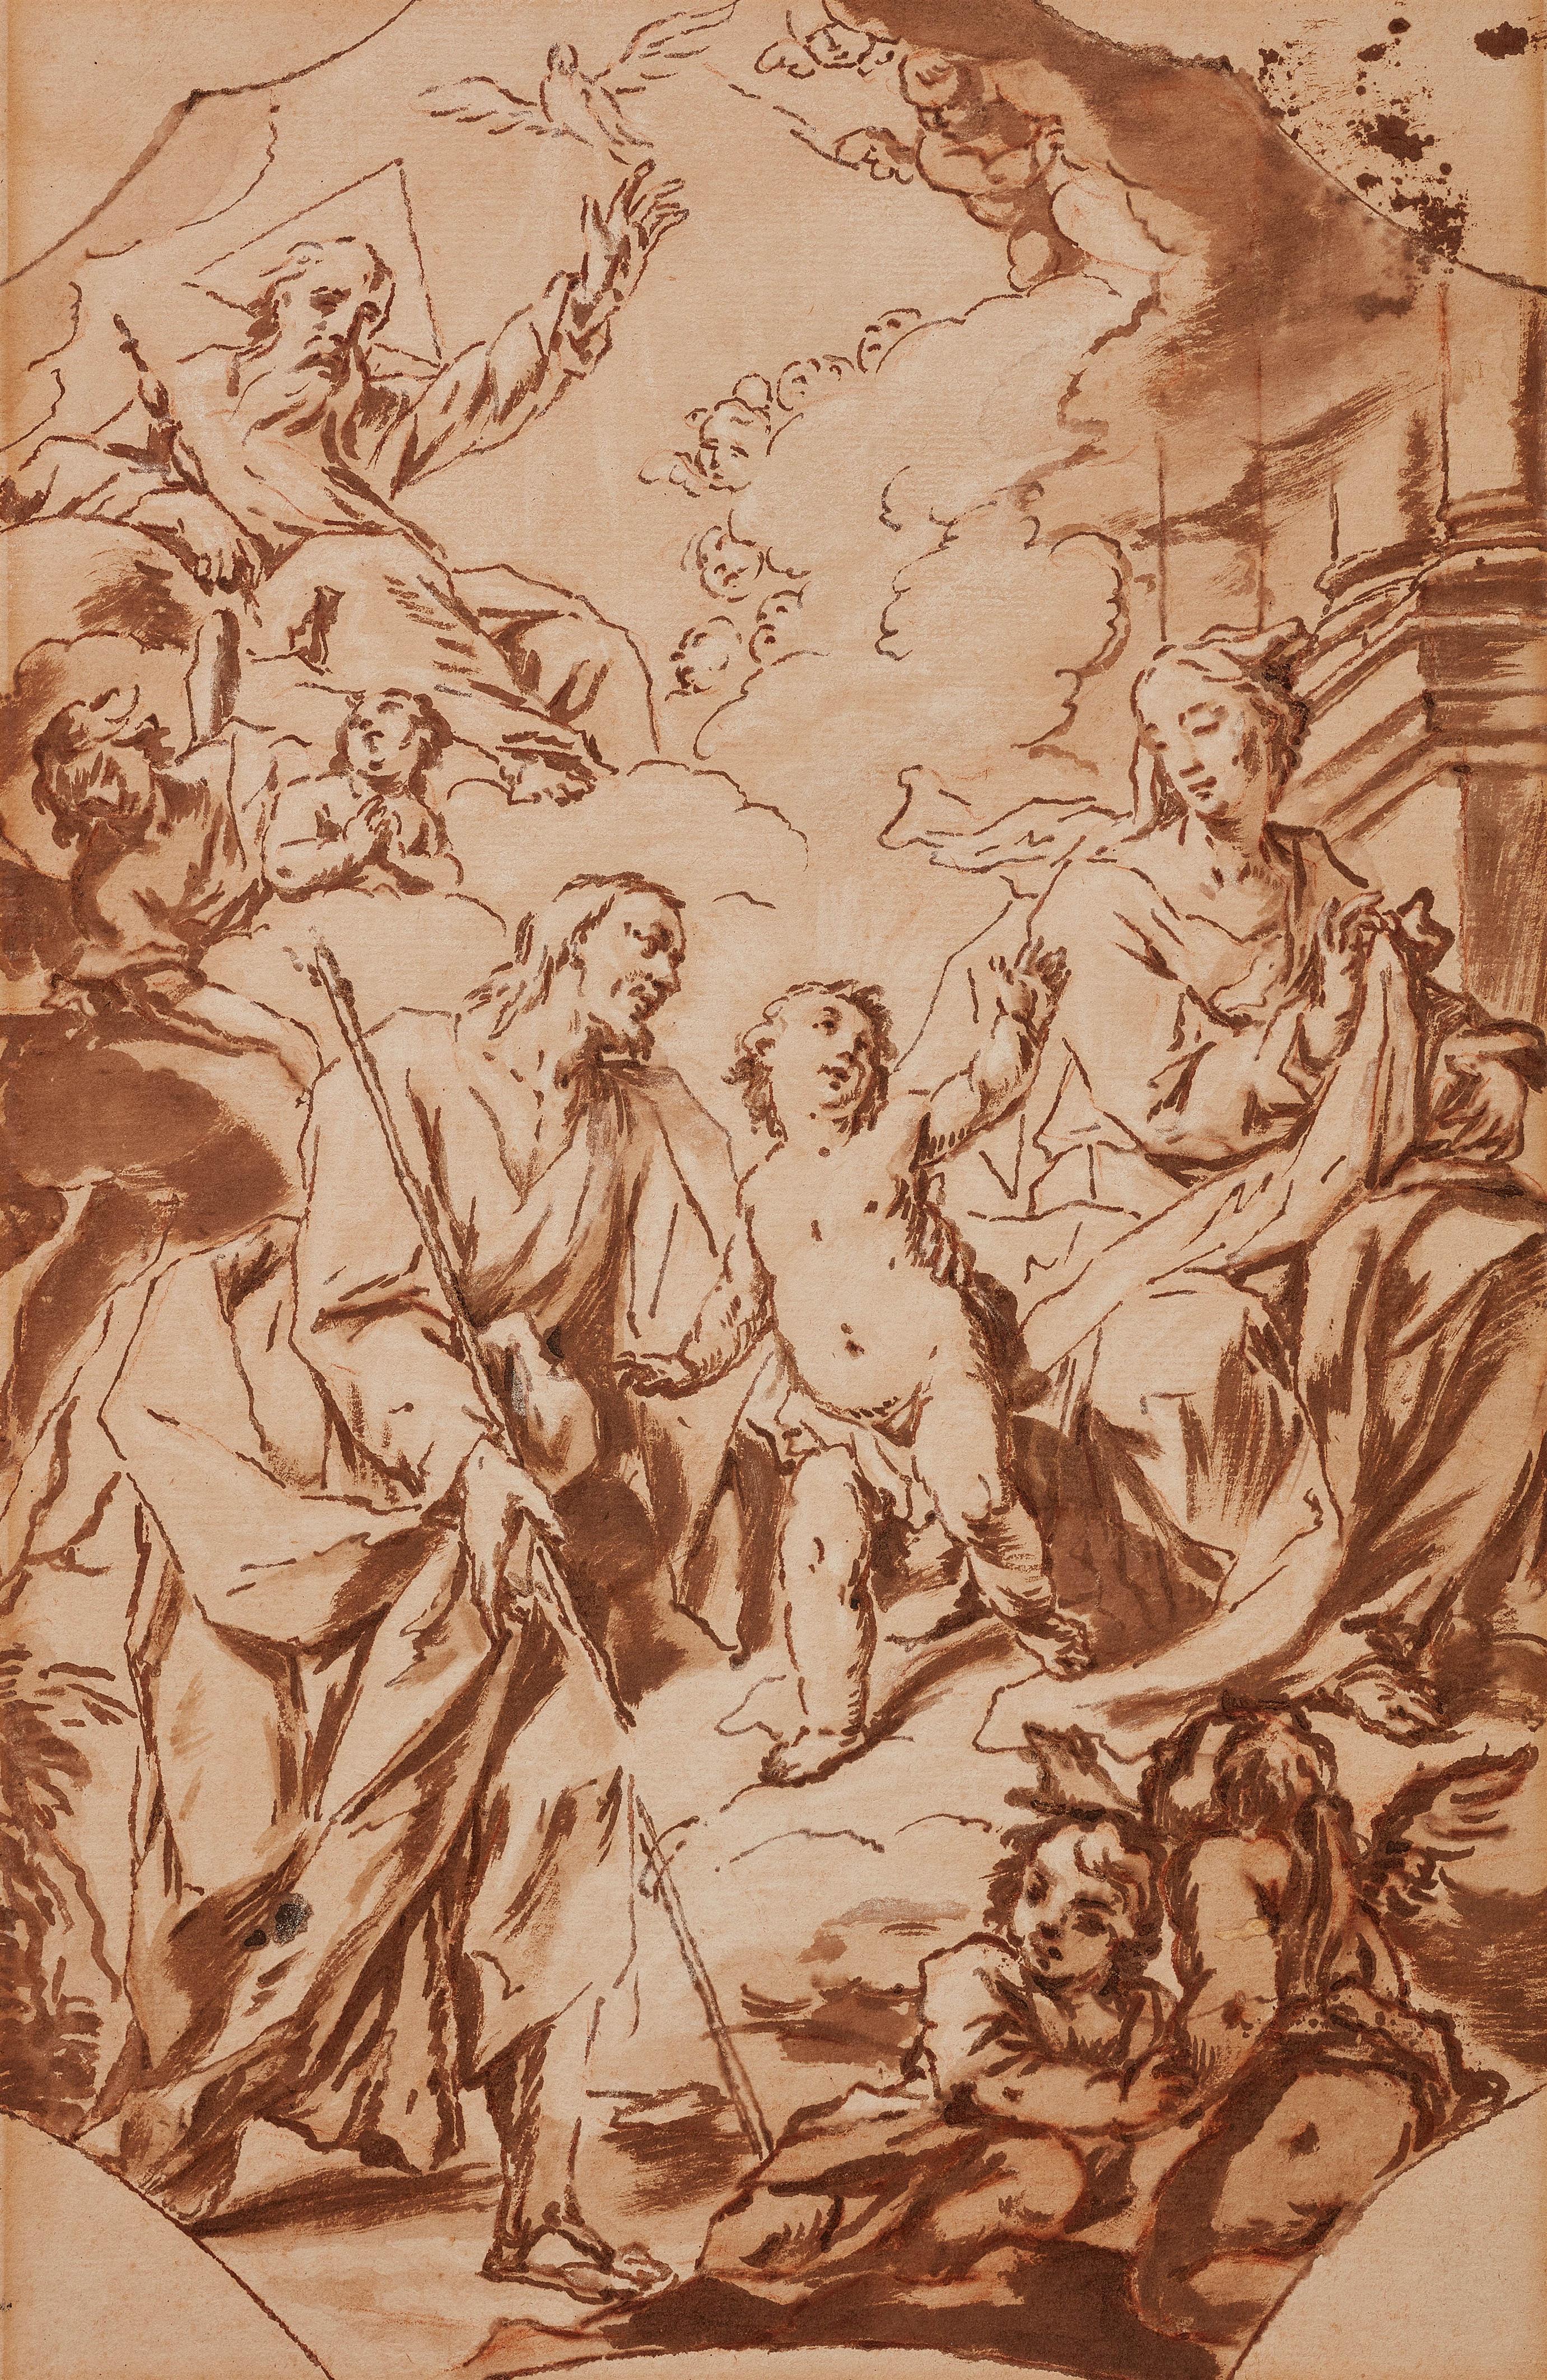 Venetian School 18th century - Altarpiece design with Holy Family - image-1